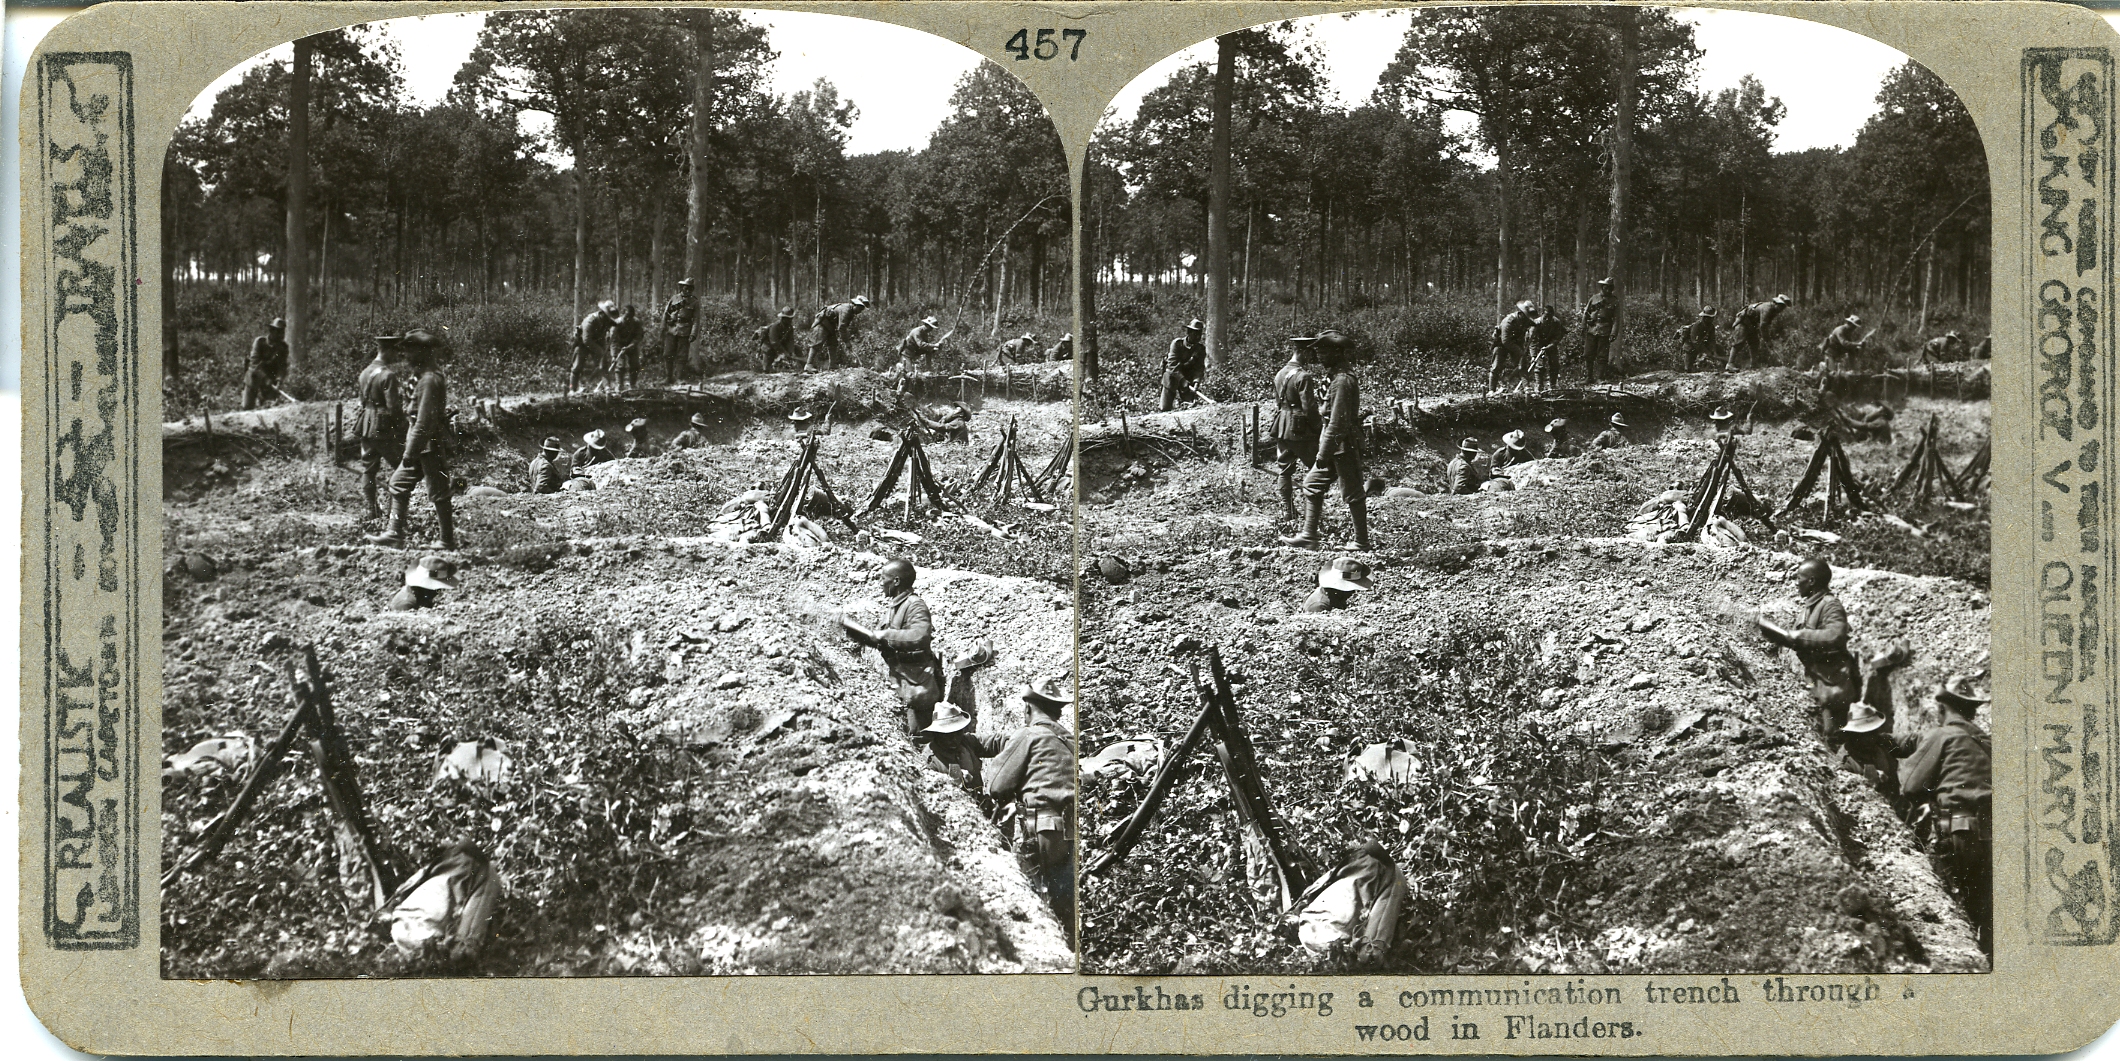 Gurkhas digging a communication trench through a wood in Flanders